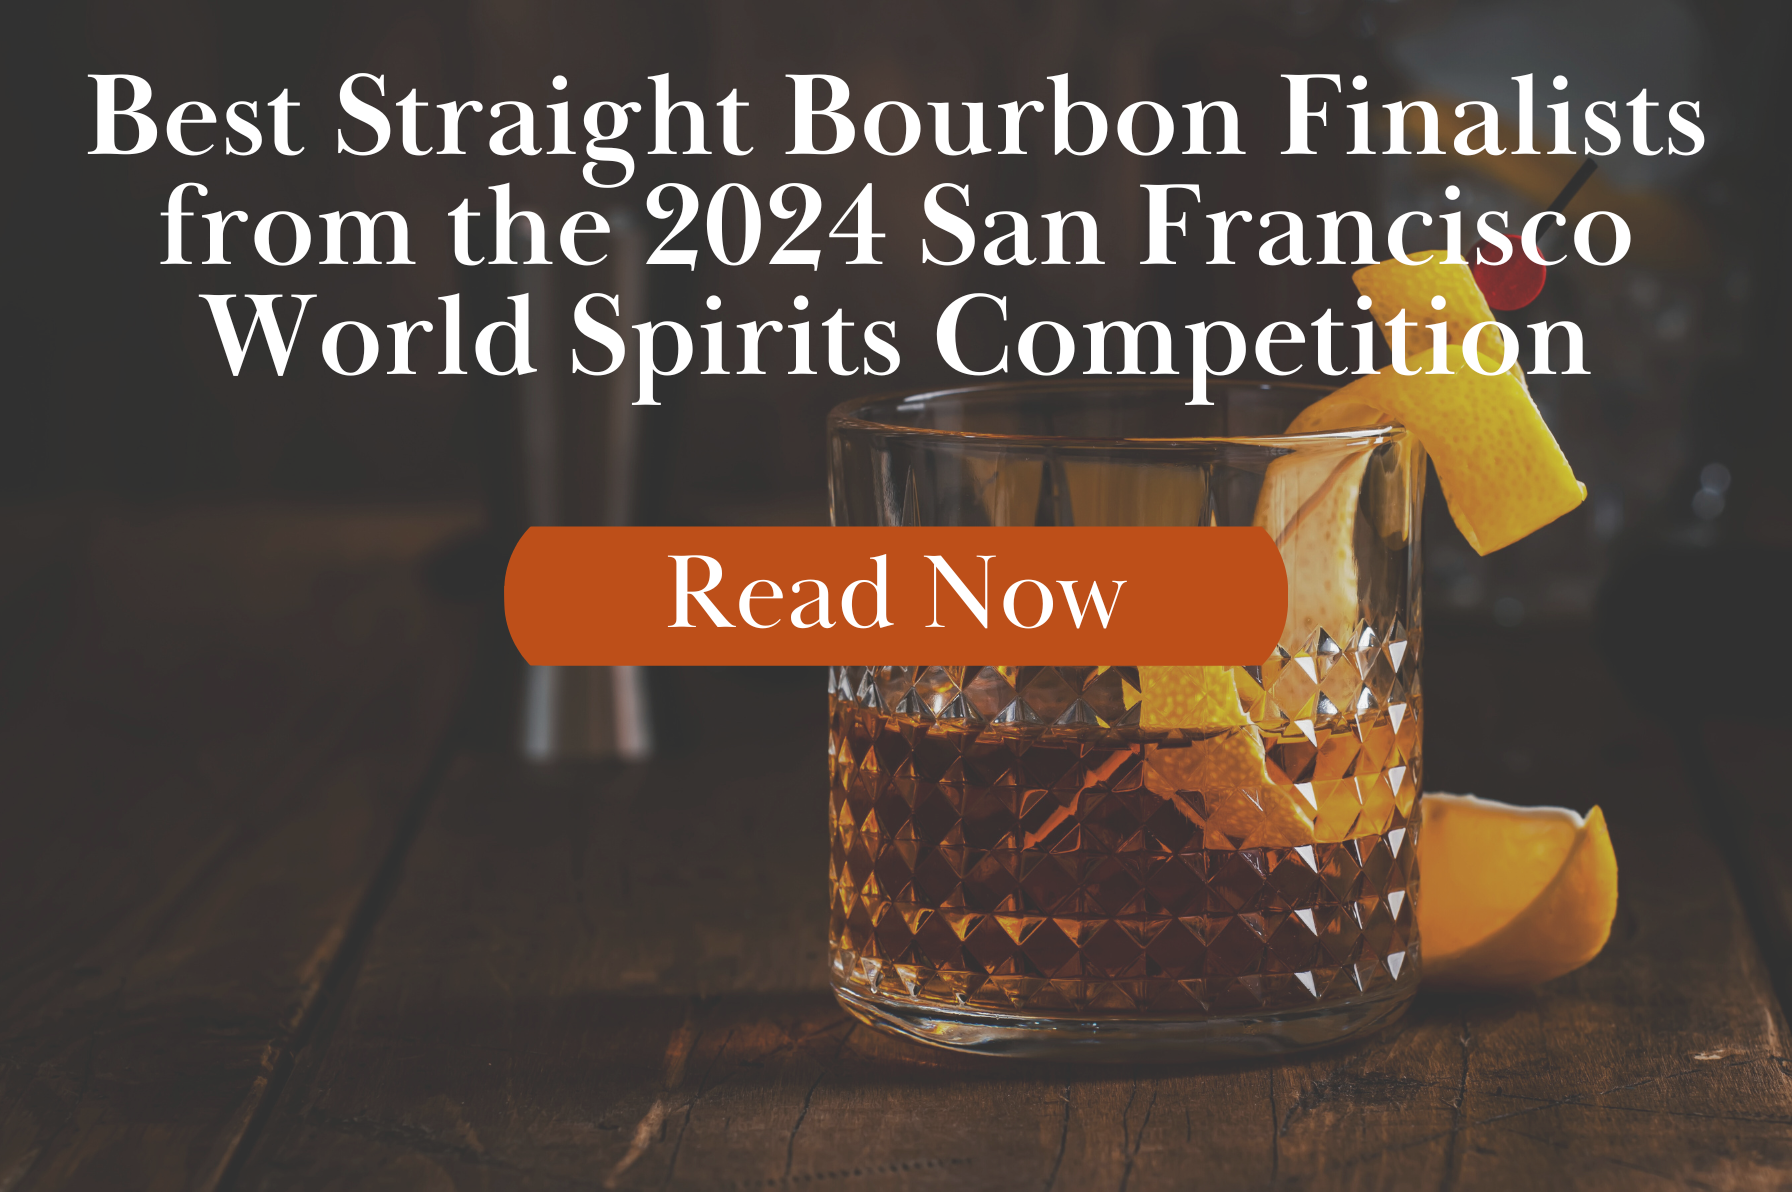 Best Straight Bourbon Finalists from the 2024 San Francisco World Spirits Competition